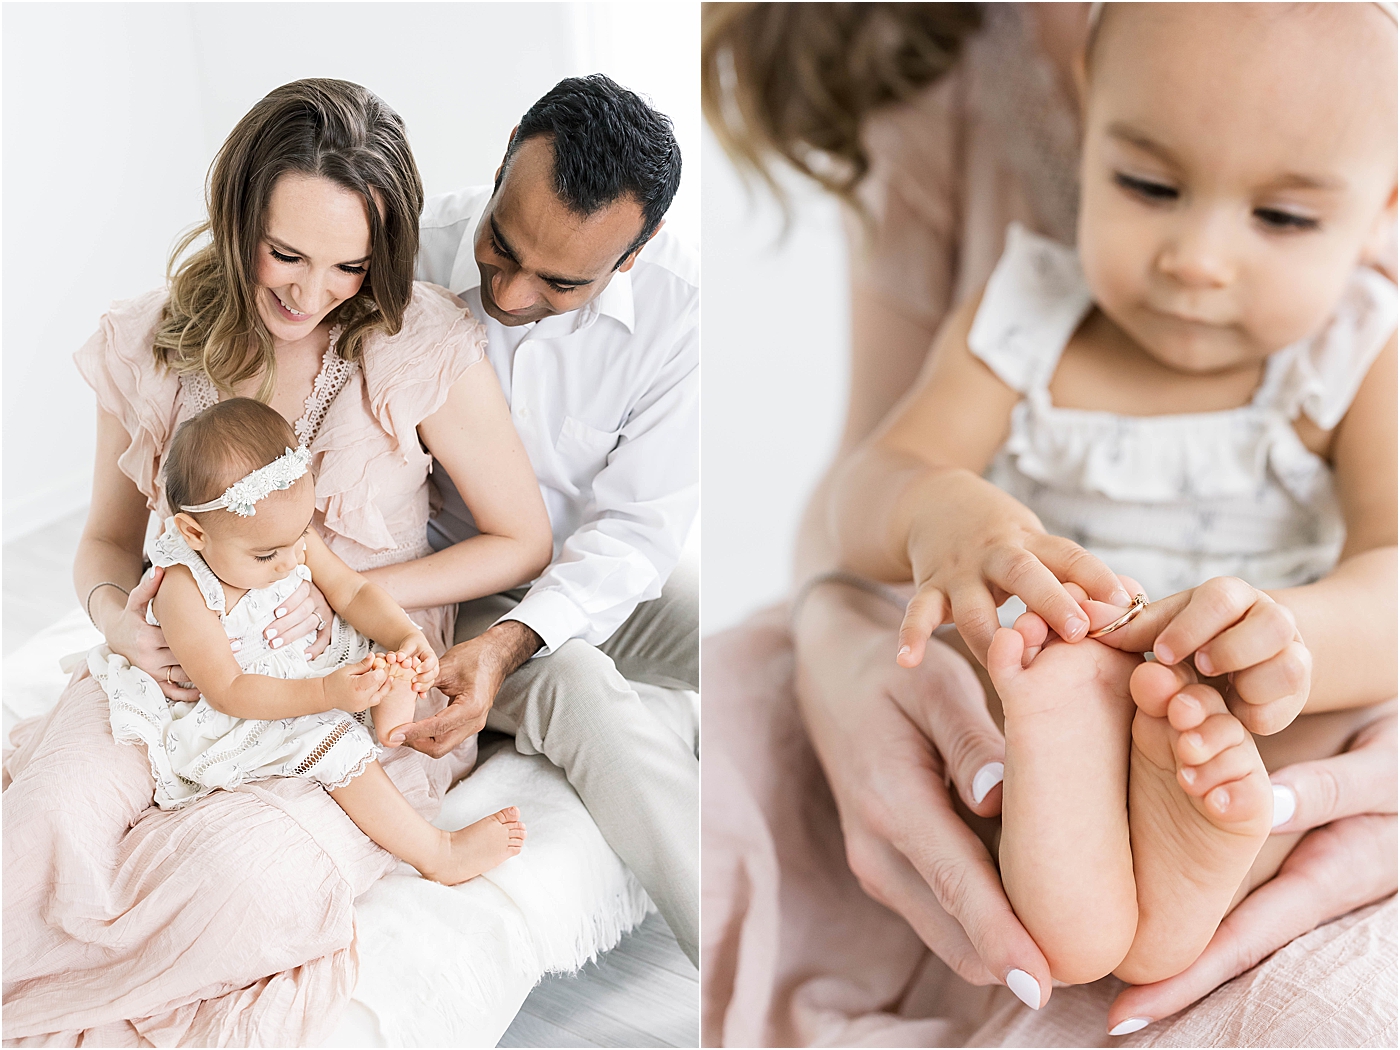 One year old photoshoot and daughter with heirloom ring | Lindsay Konopa Photography